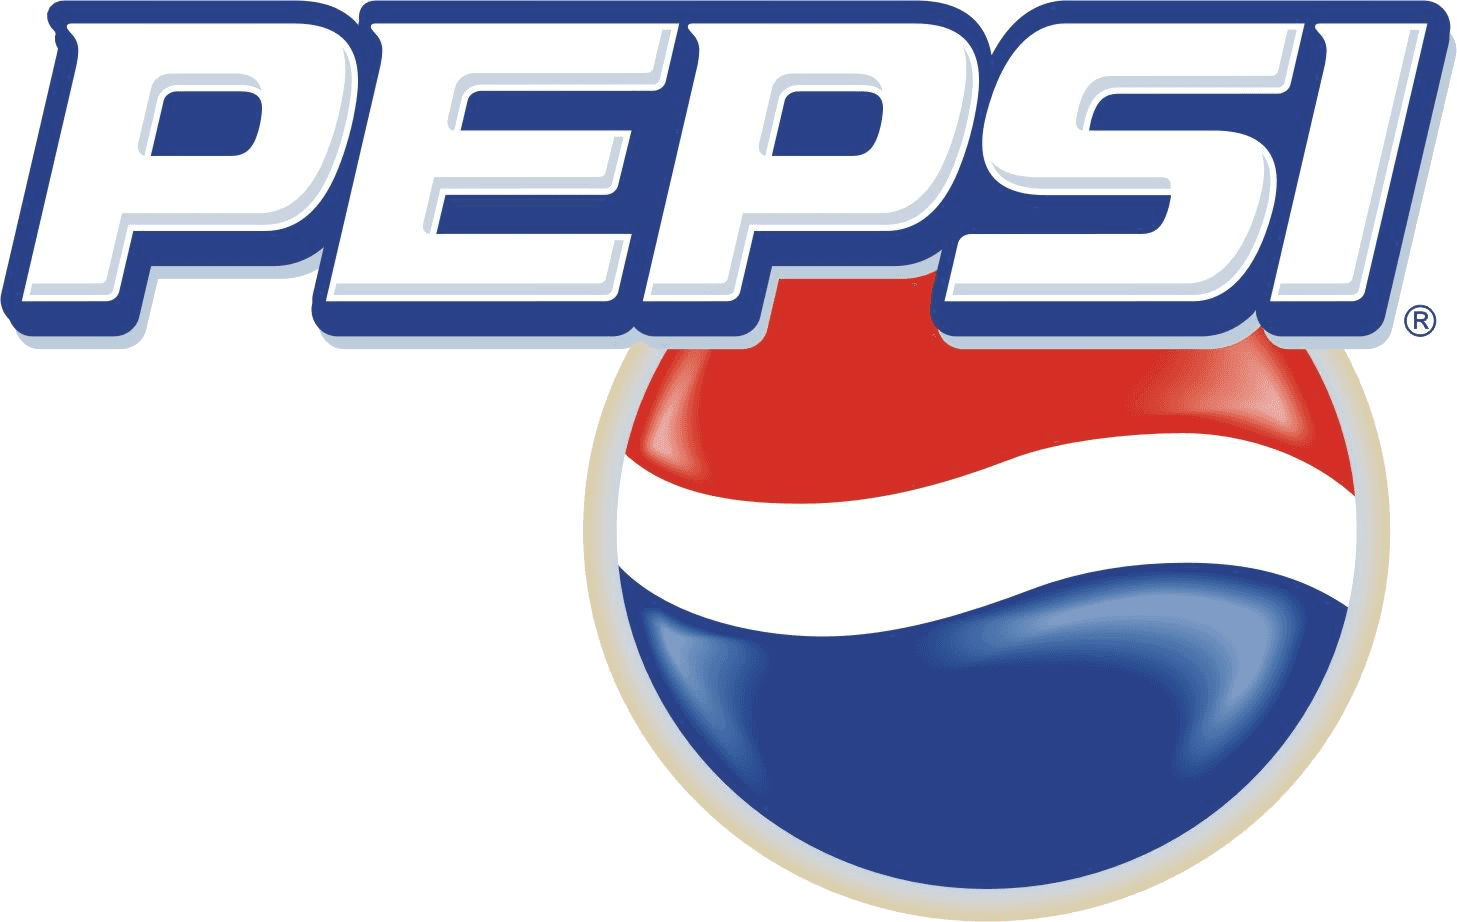 Pepsi products served here